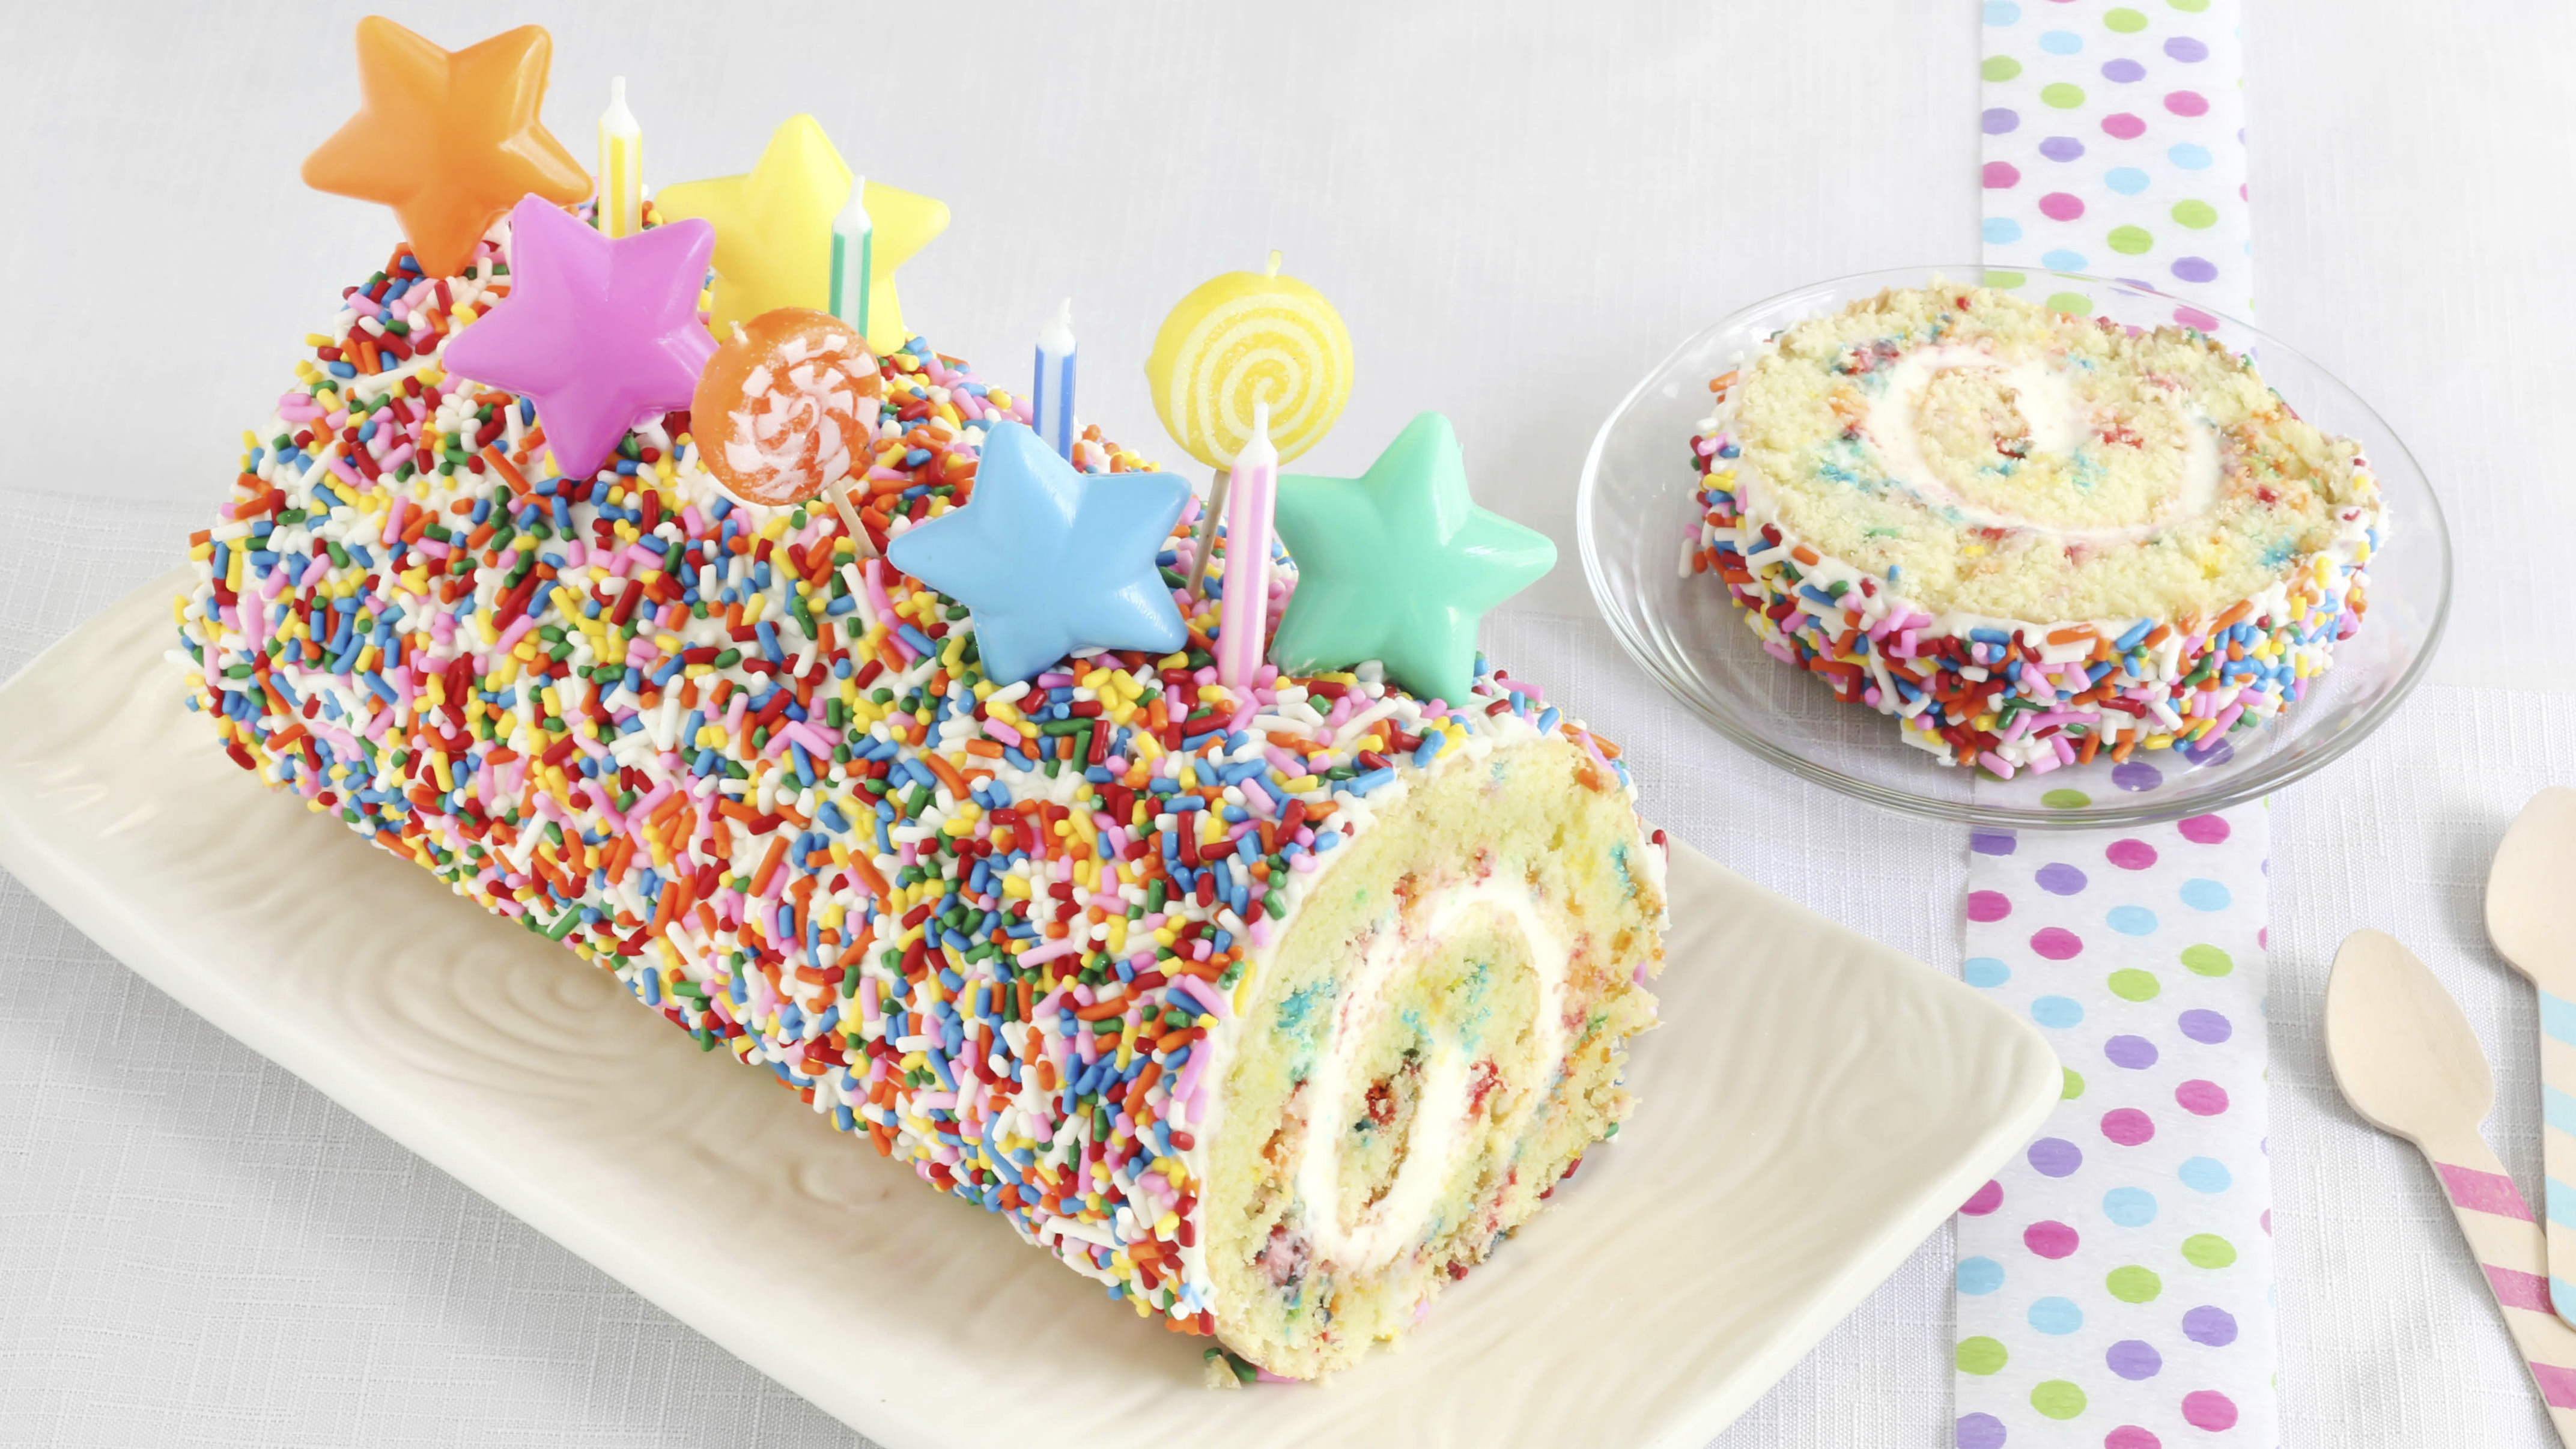 Funfetti cake with white chocolate frosting